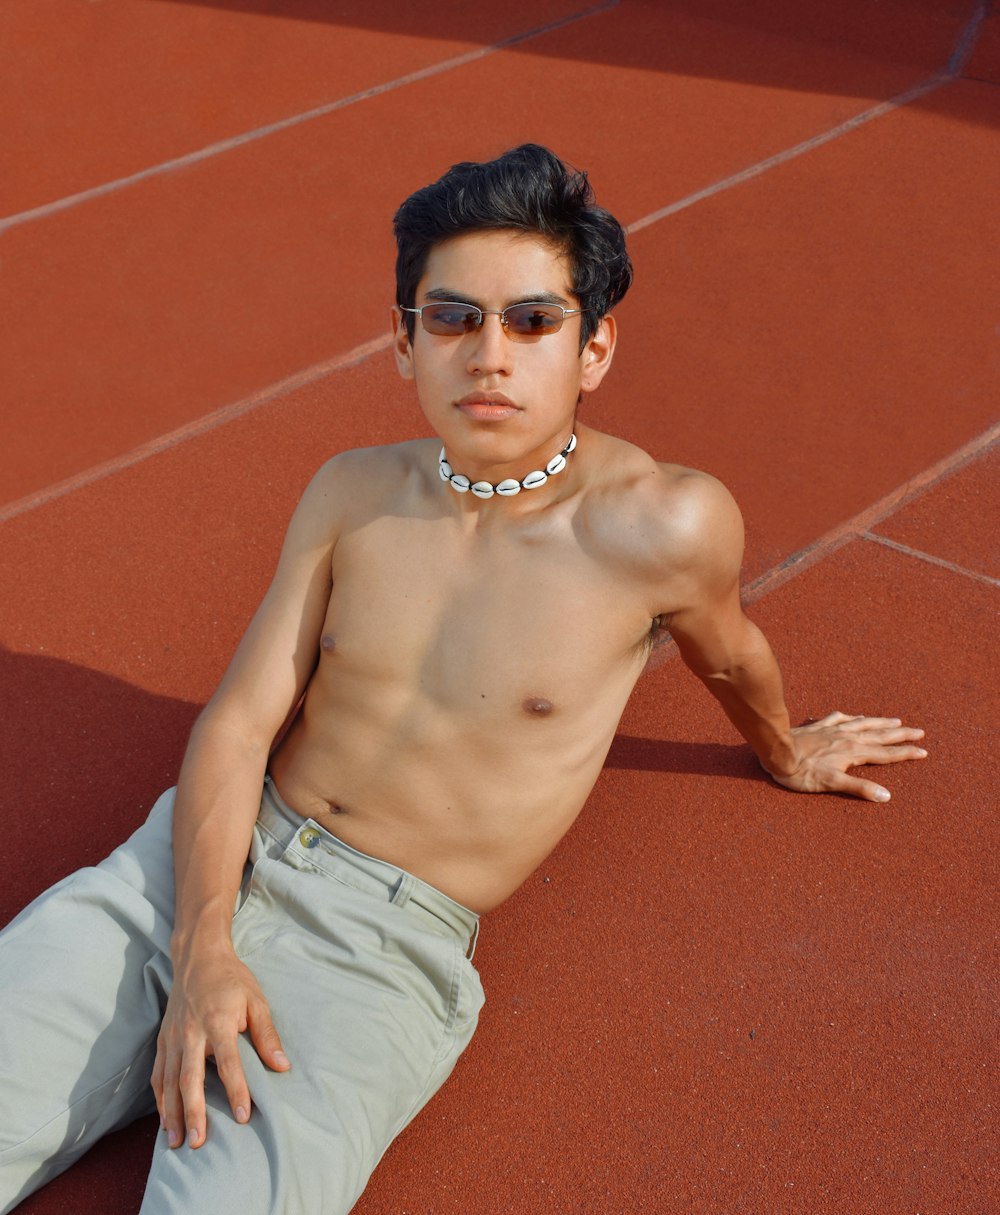 a shirtless young man sitting on a tennis court